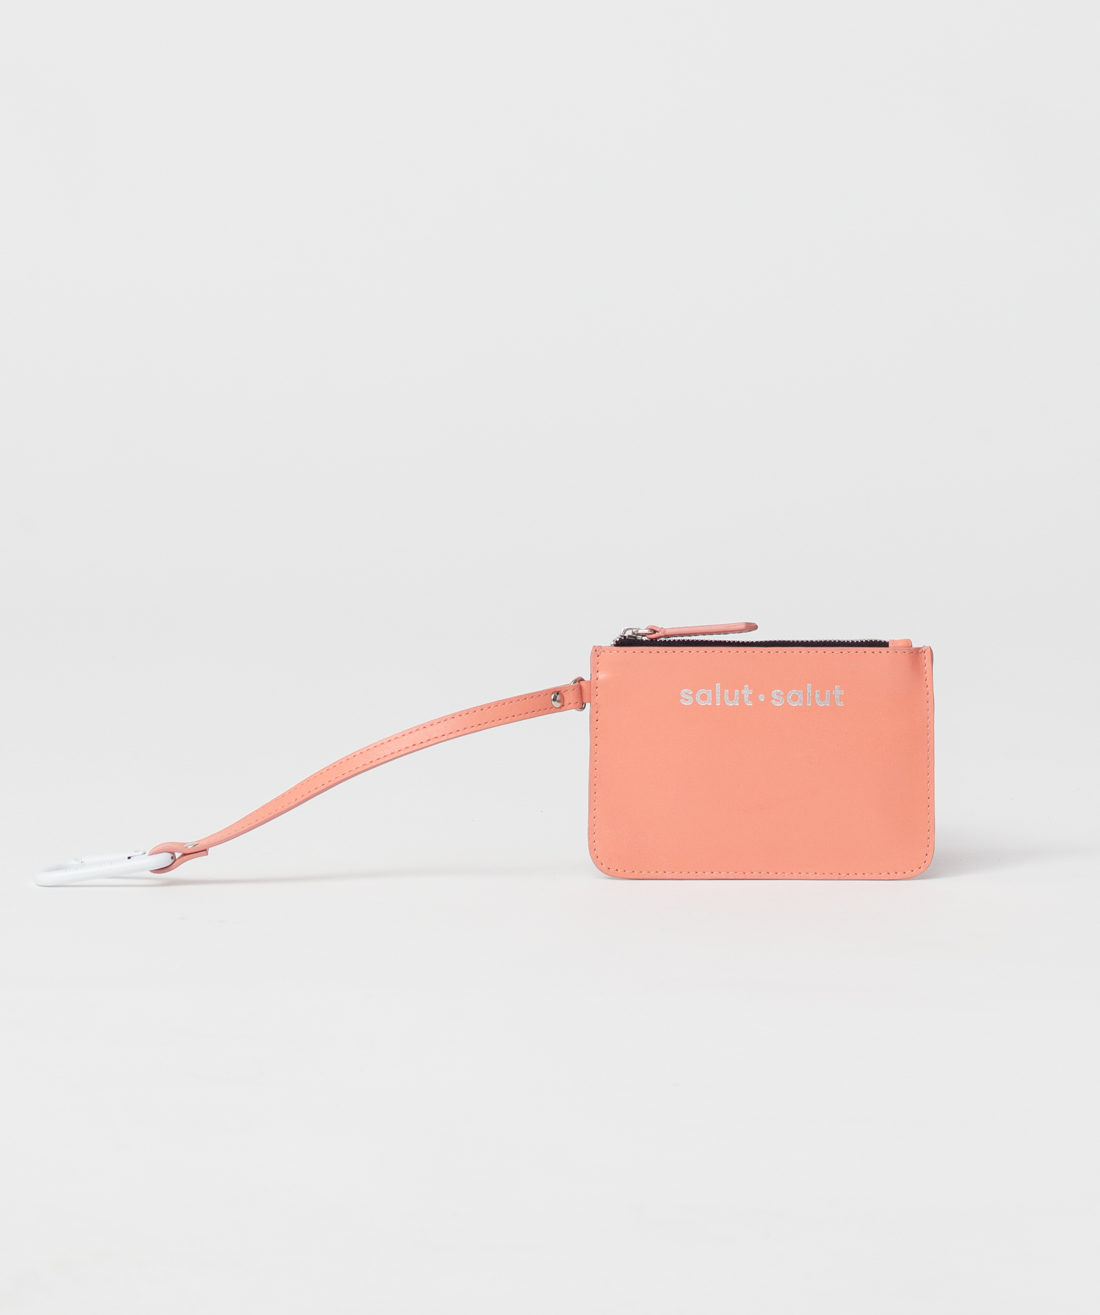 Small Link Clutch Bag - PINK LEATHER